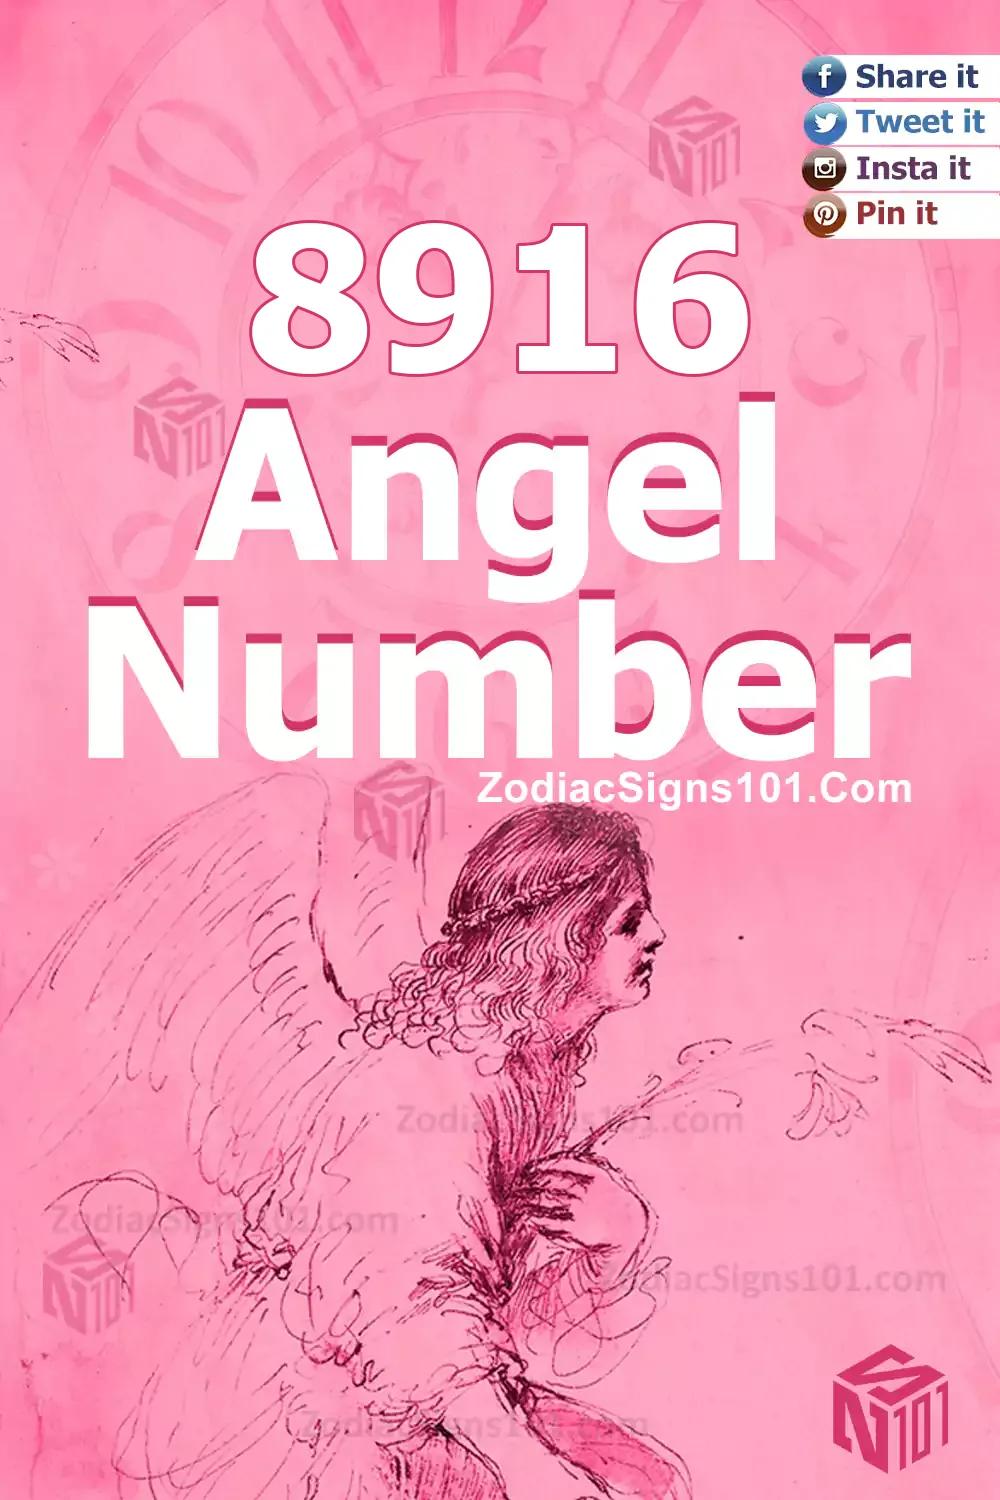 8916 Angel Number Meaning